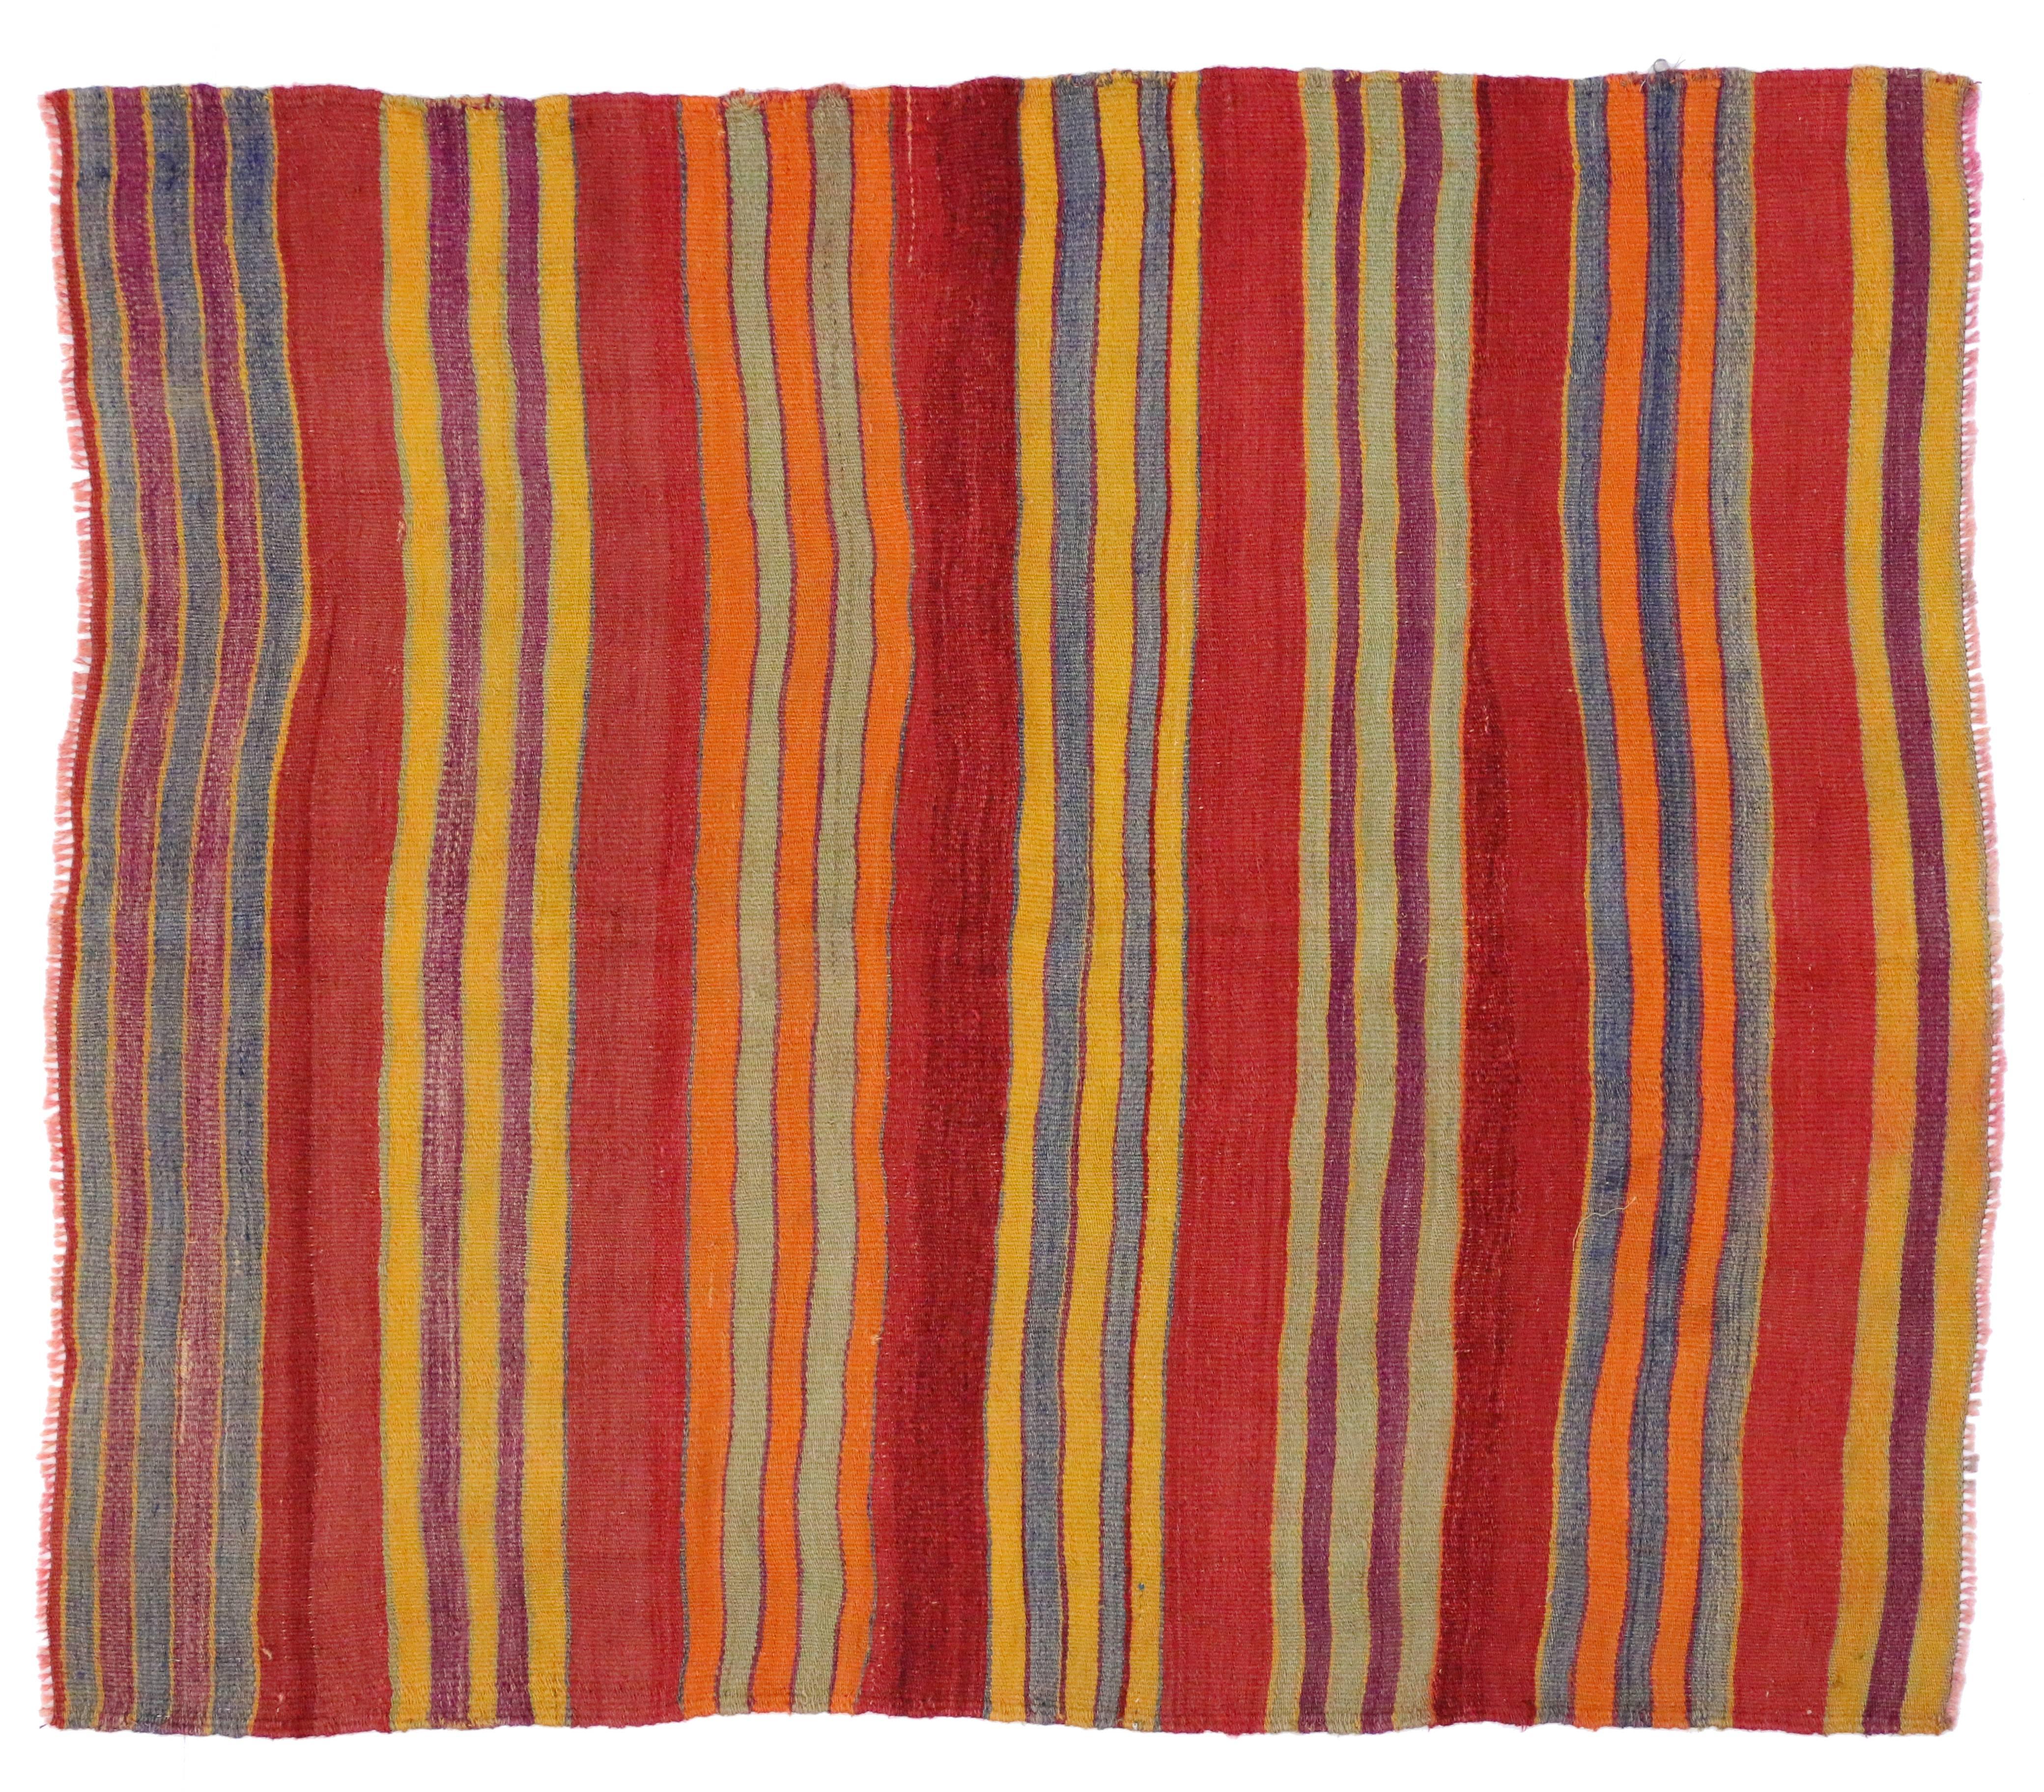 20th Century Vintage Turkish Kilim with Multi-Color Stripes in Modern Style, Red FlatWeave